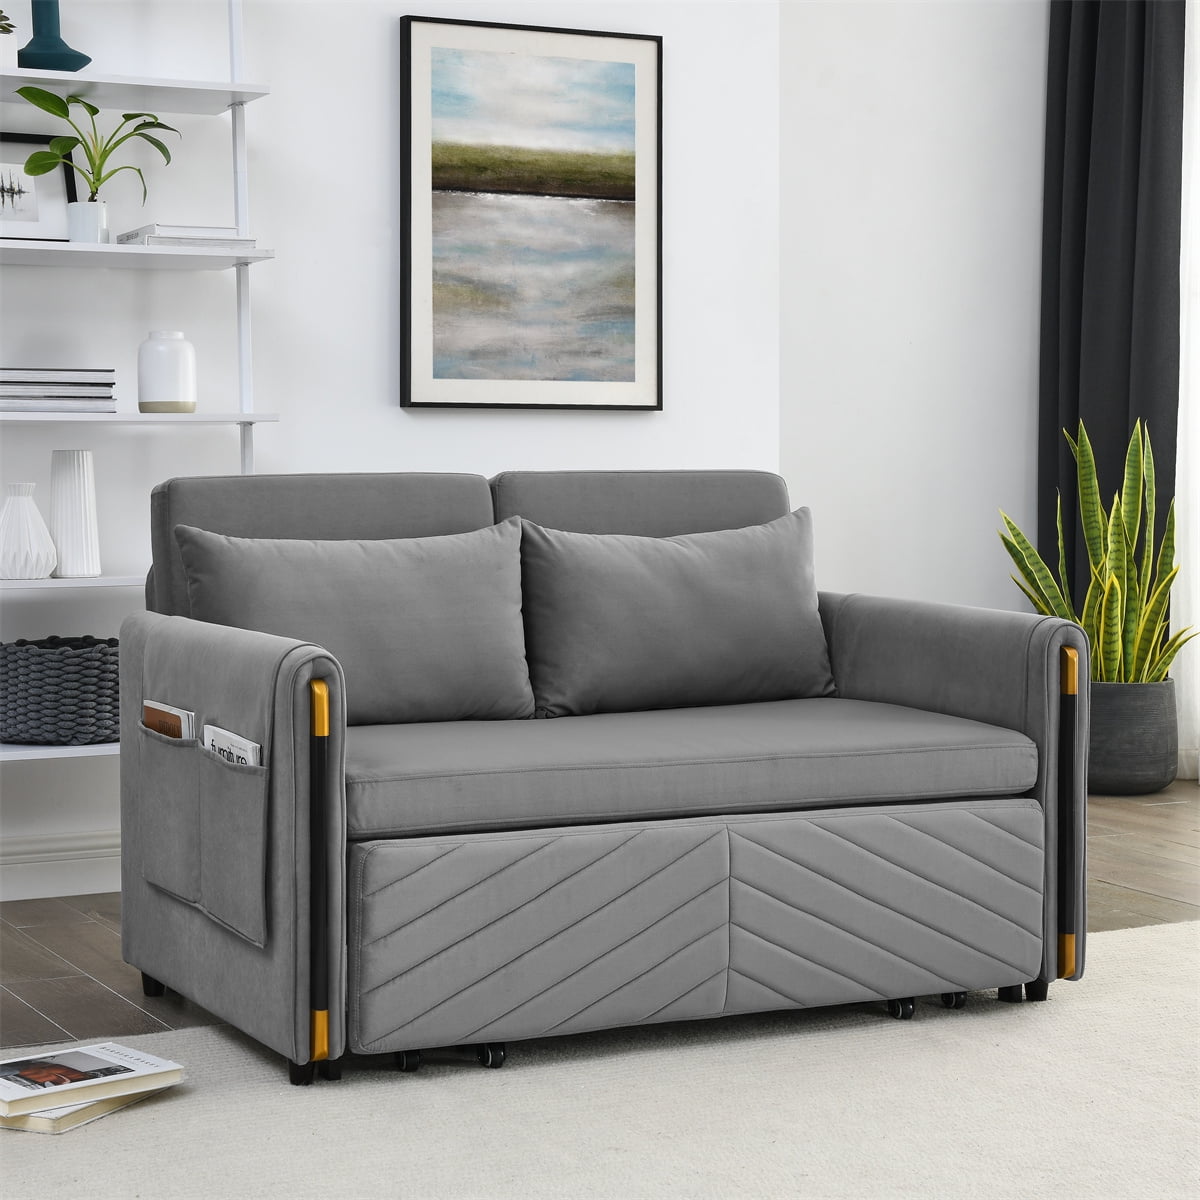 Dropship Modern Velvet Loveseat Futon Sofa Couch Pullout Bed, Small Love  Seat Lounge Sofa W/Reclining Backrest, Toss Pillows, Pockets, Furniture For  Living Room,3 In 1 Convertible Sleeper Sofa Bed, Gray to Sell